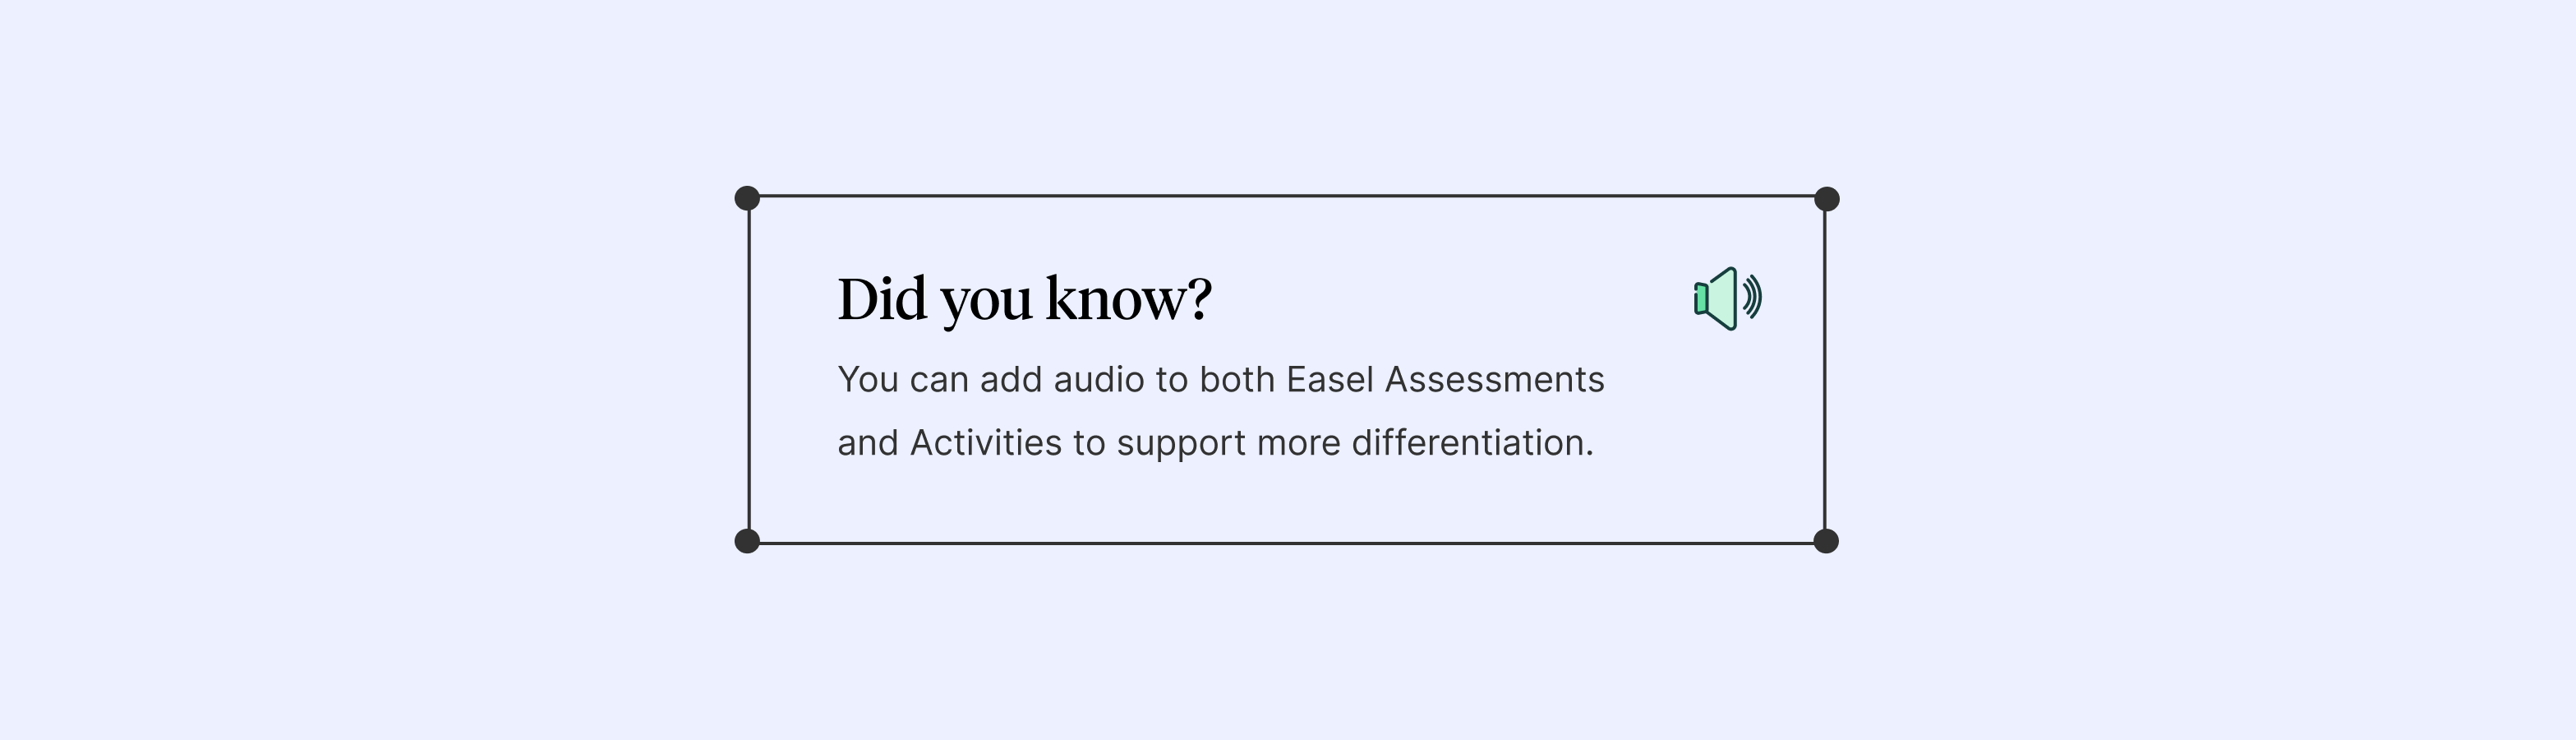 Did you know? You can add audio to both Easel Assessments and Activities to support more differentiation.